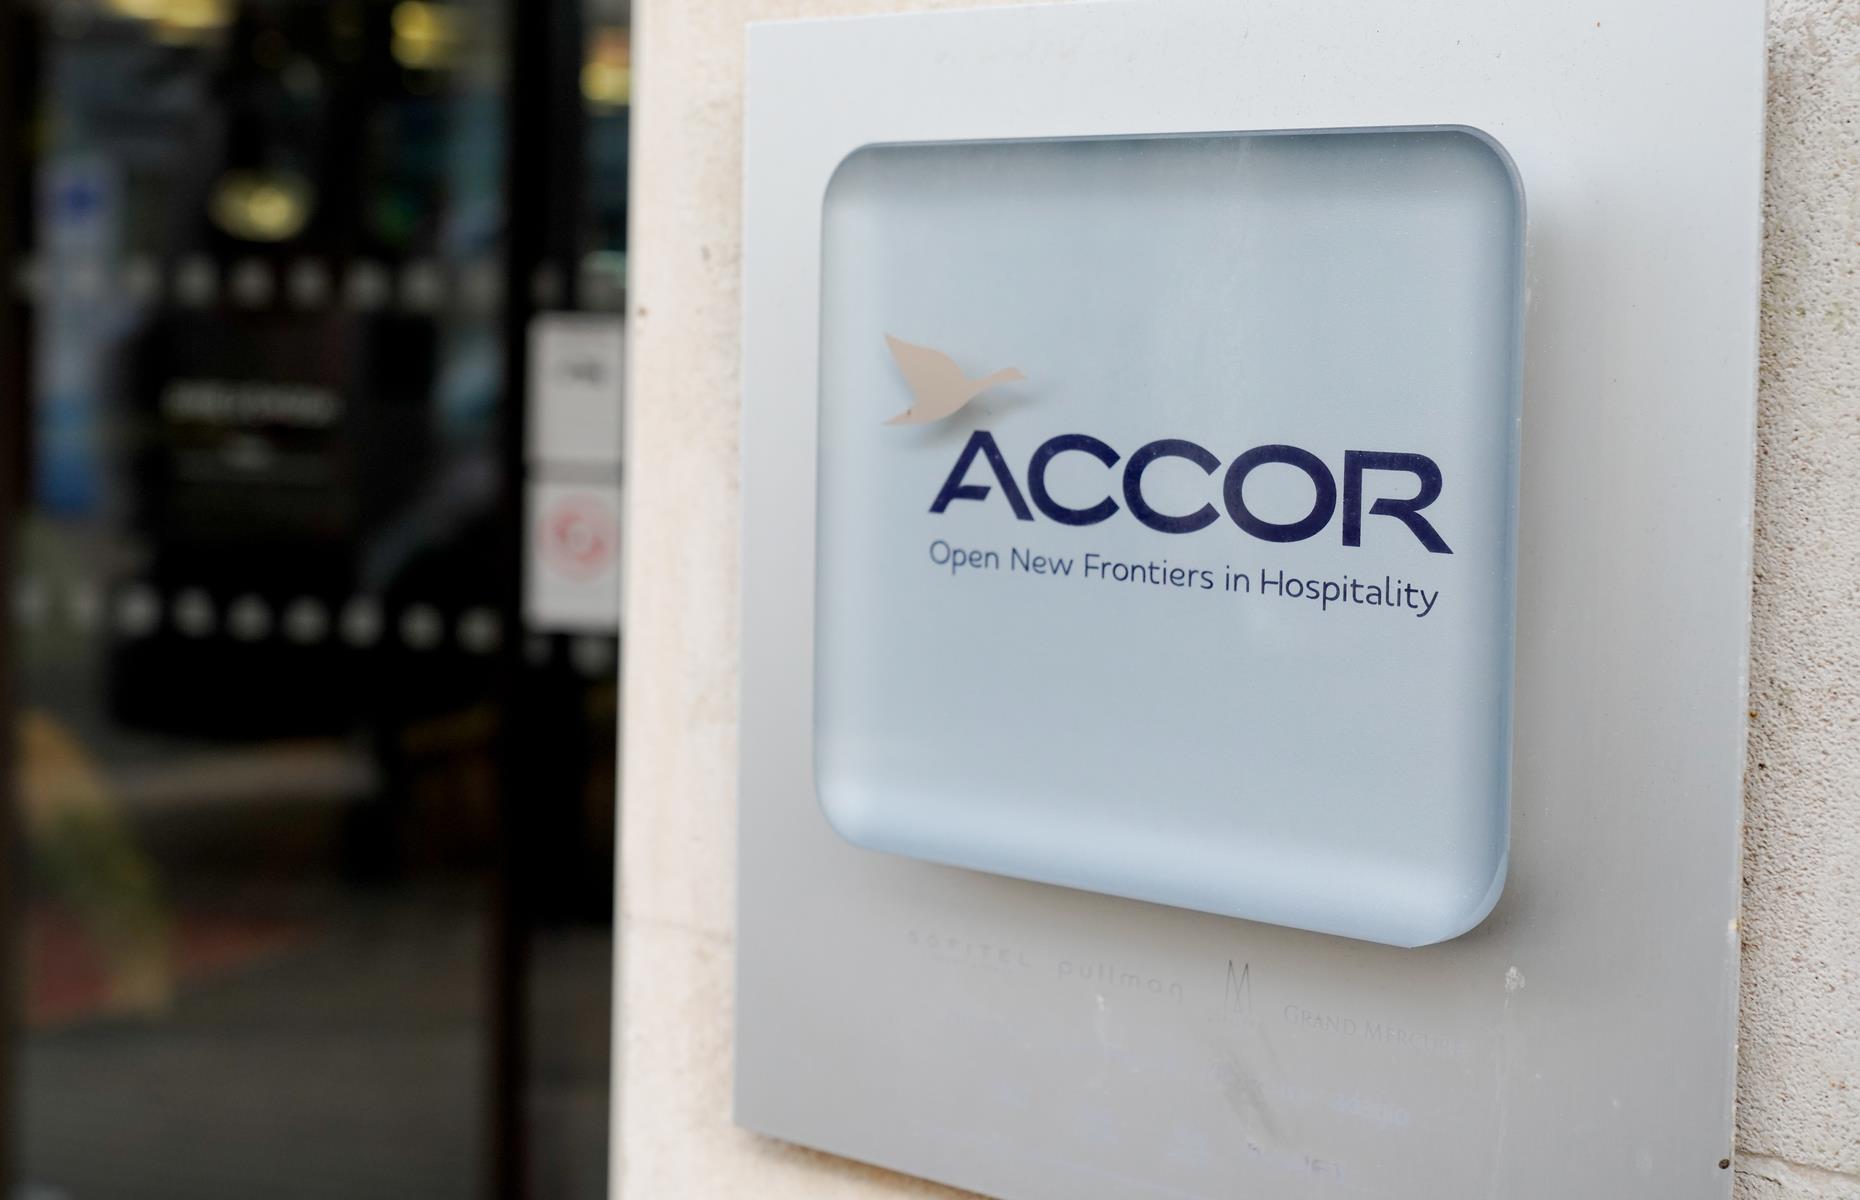 Europe's largest hospitality group Accor offers hotel rooms for the homeless